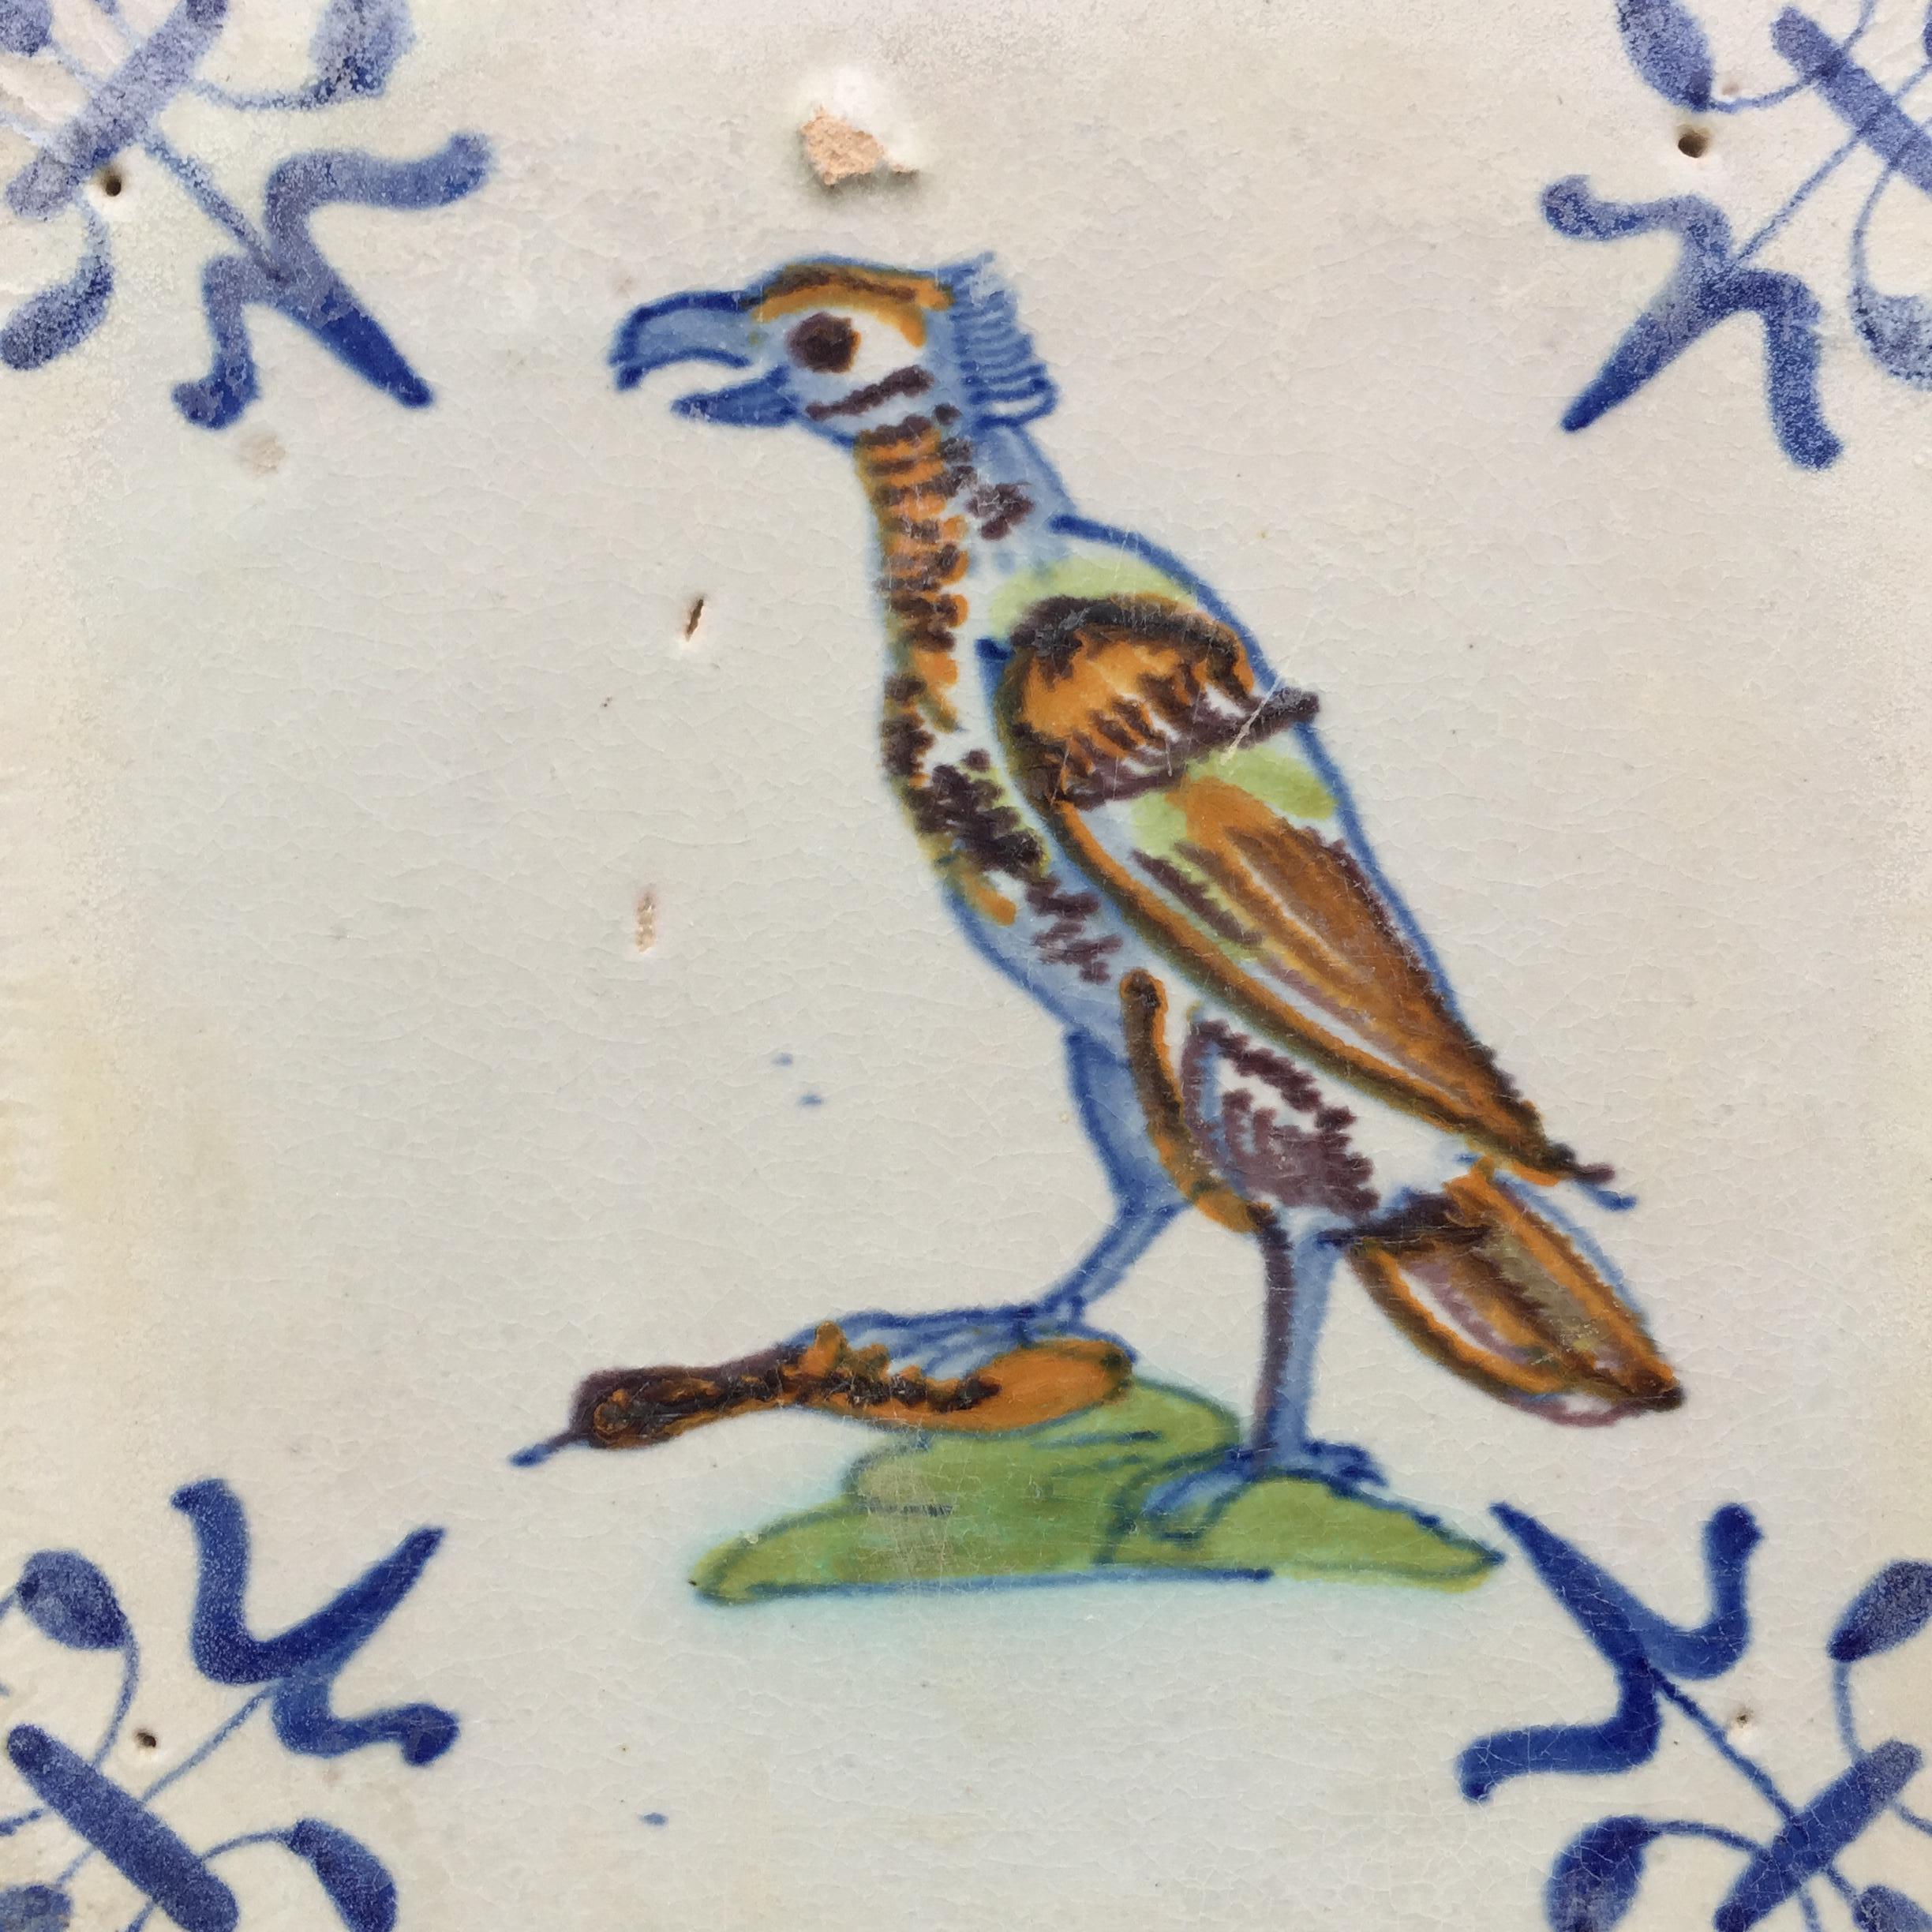 The Netherlands
Gouda
Circa 1625 – 1650

A polychrome Dutch tile with the decoration of a proud hawk with a prey, a duck?, under his paw.
This tile was made in the city of Gouda by workshop ‘De Swaen’ (The Swan) of Willem Jansz Oliviersz